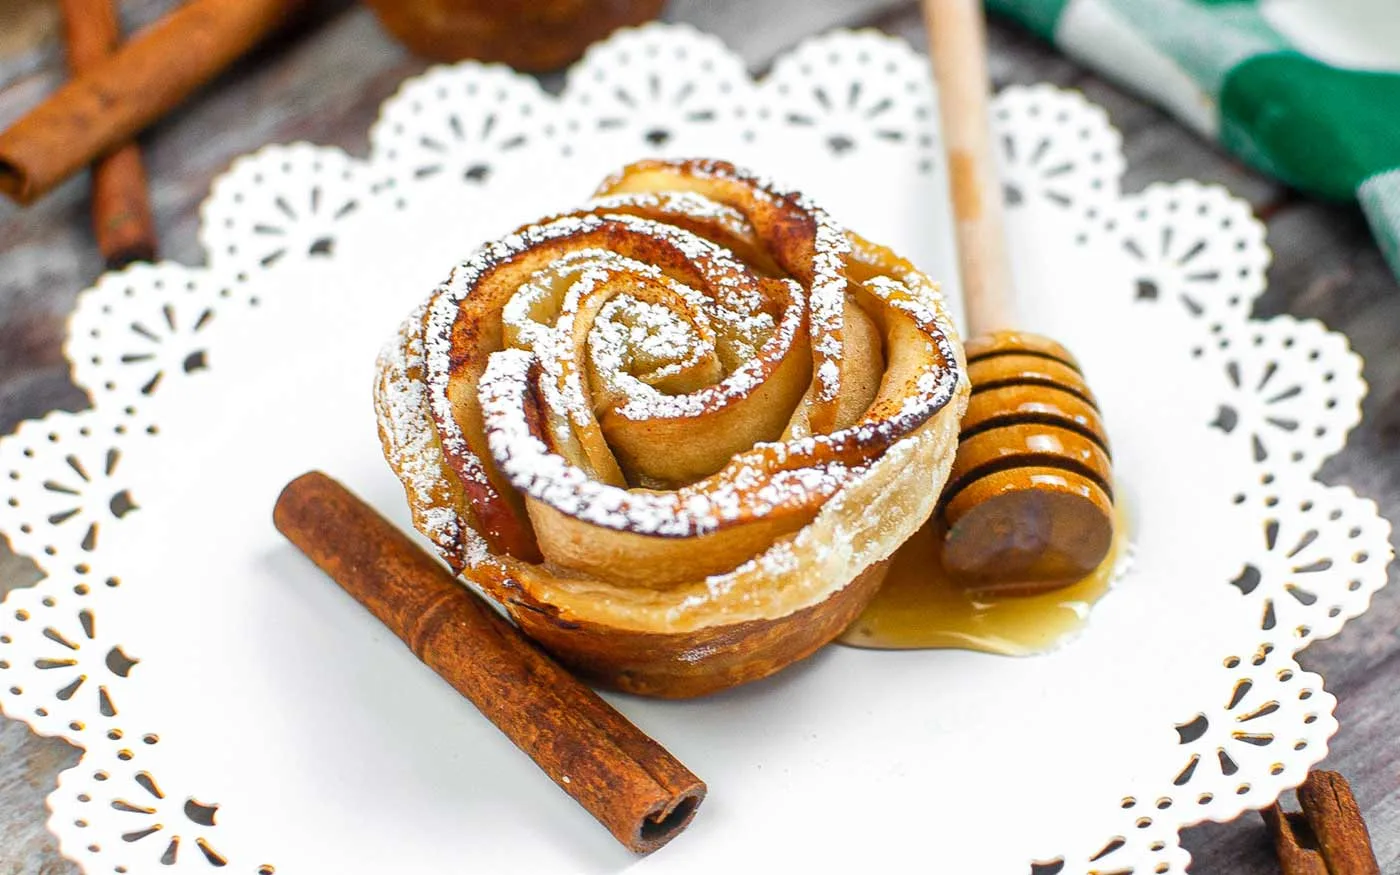 An air fried apple rose on a serving platter with a cinnamon stick and a honey dipper covered in honey.